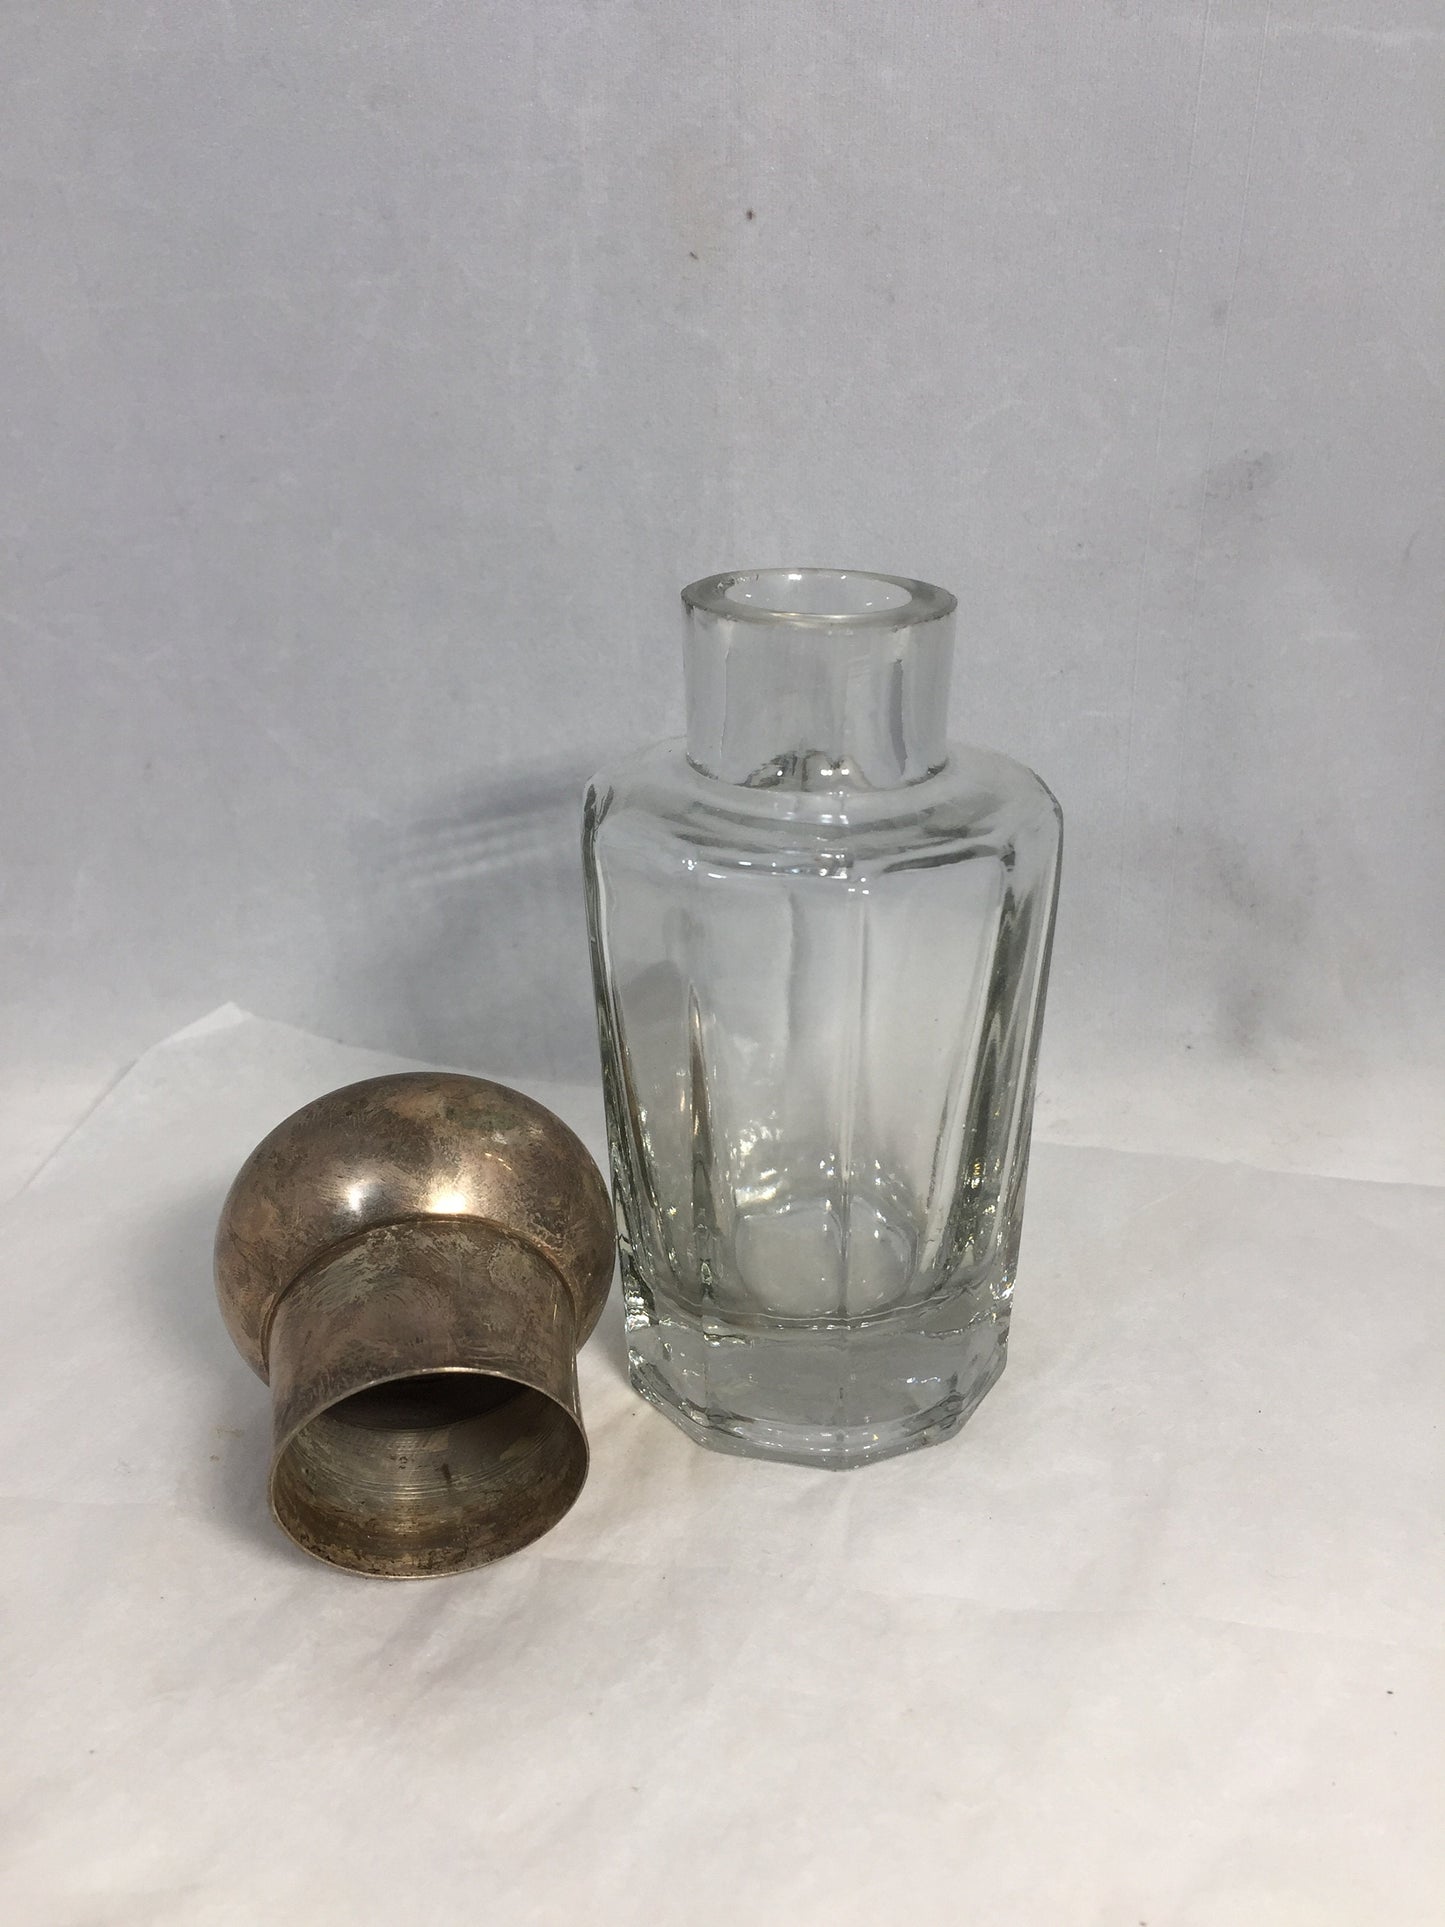 Antique Vanity Bottle in Clear Glass with Metal Lid - Duckwells